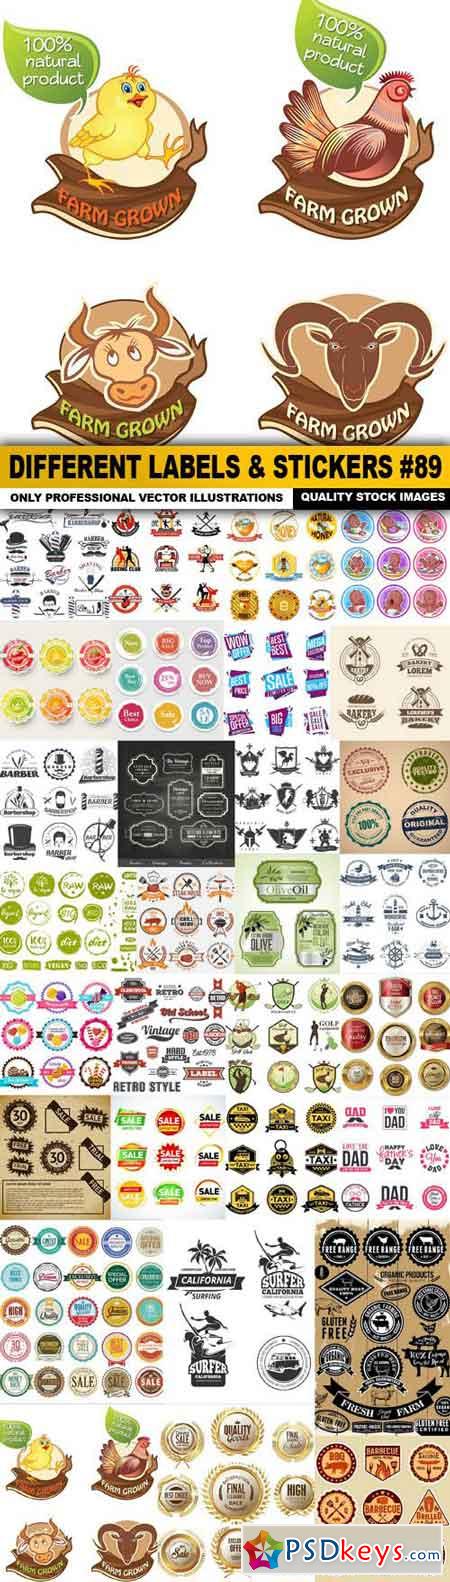 Different Labels & Stickers #89 - 30 Vector